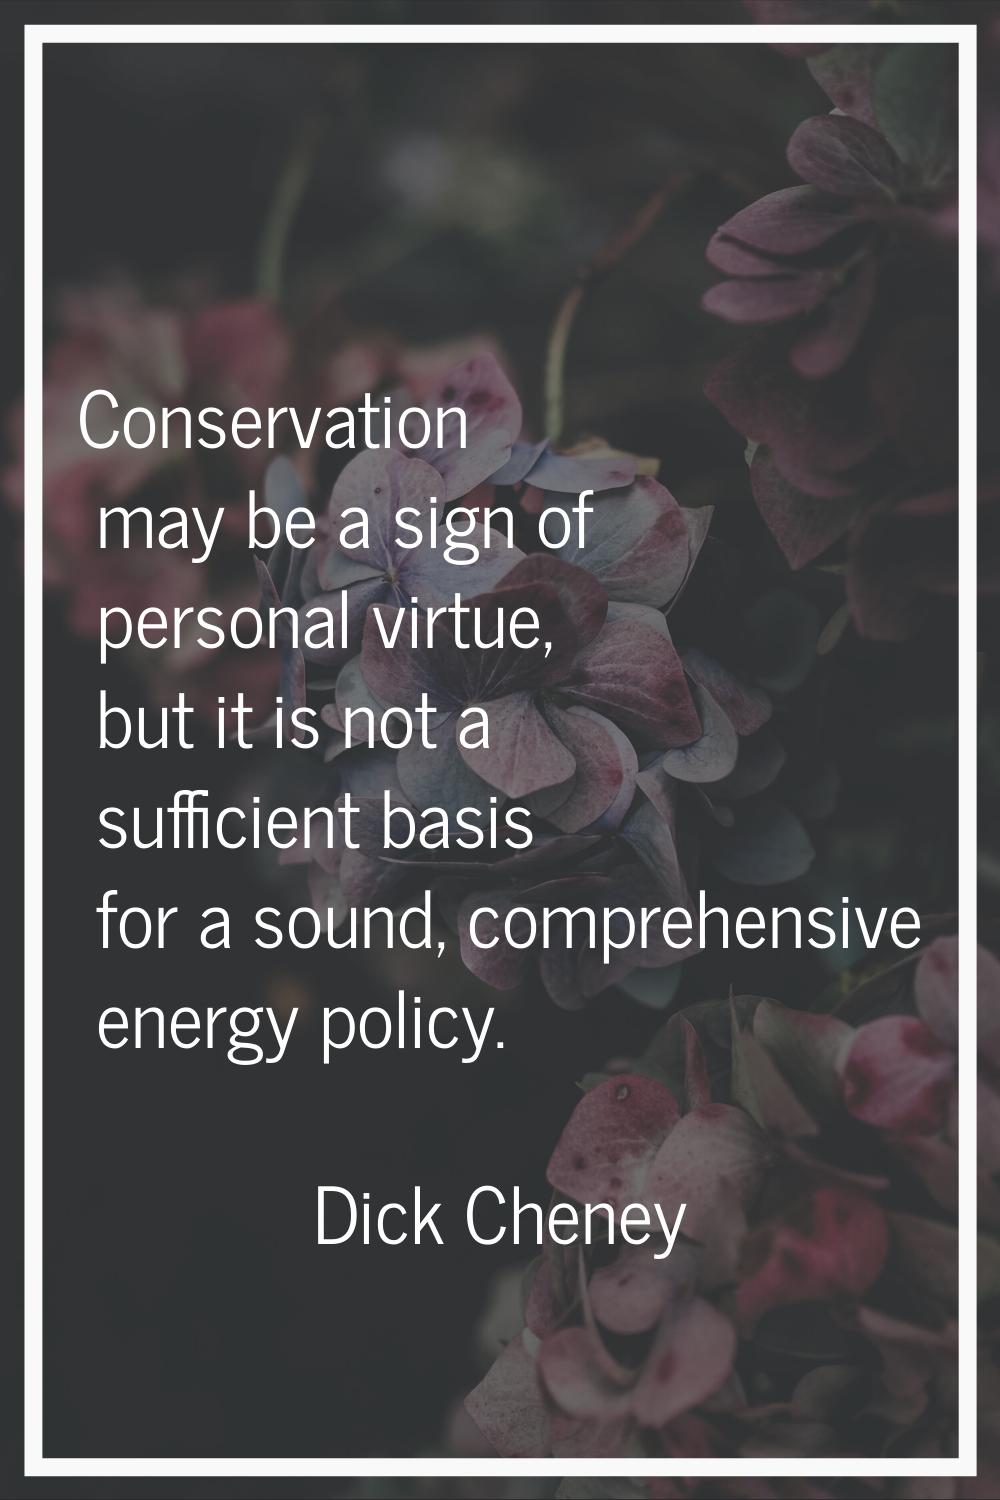 Conservation may be a sign of personal virtue, but it is not a sufficient basis for a sound, compre